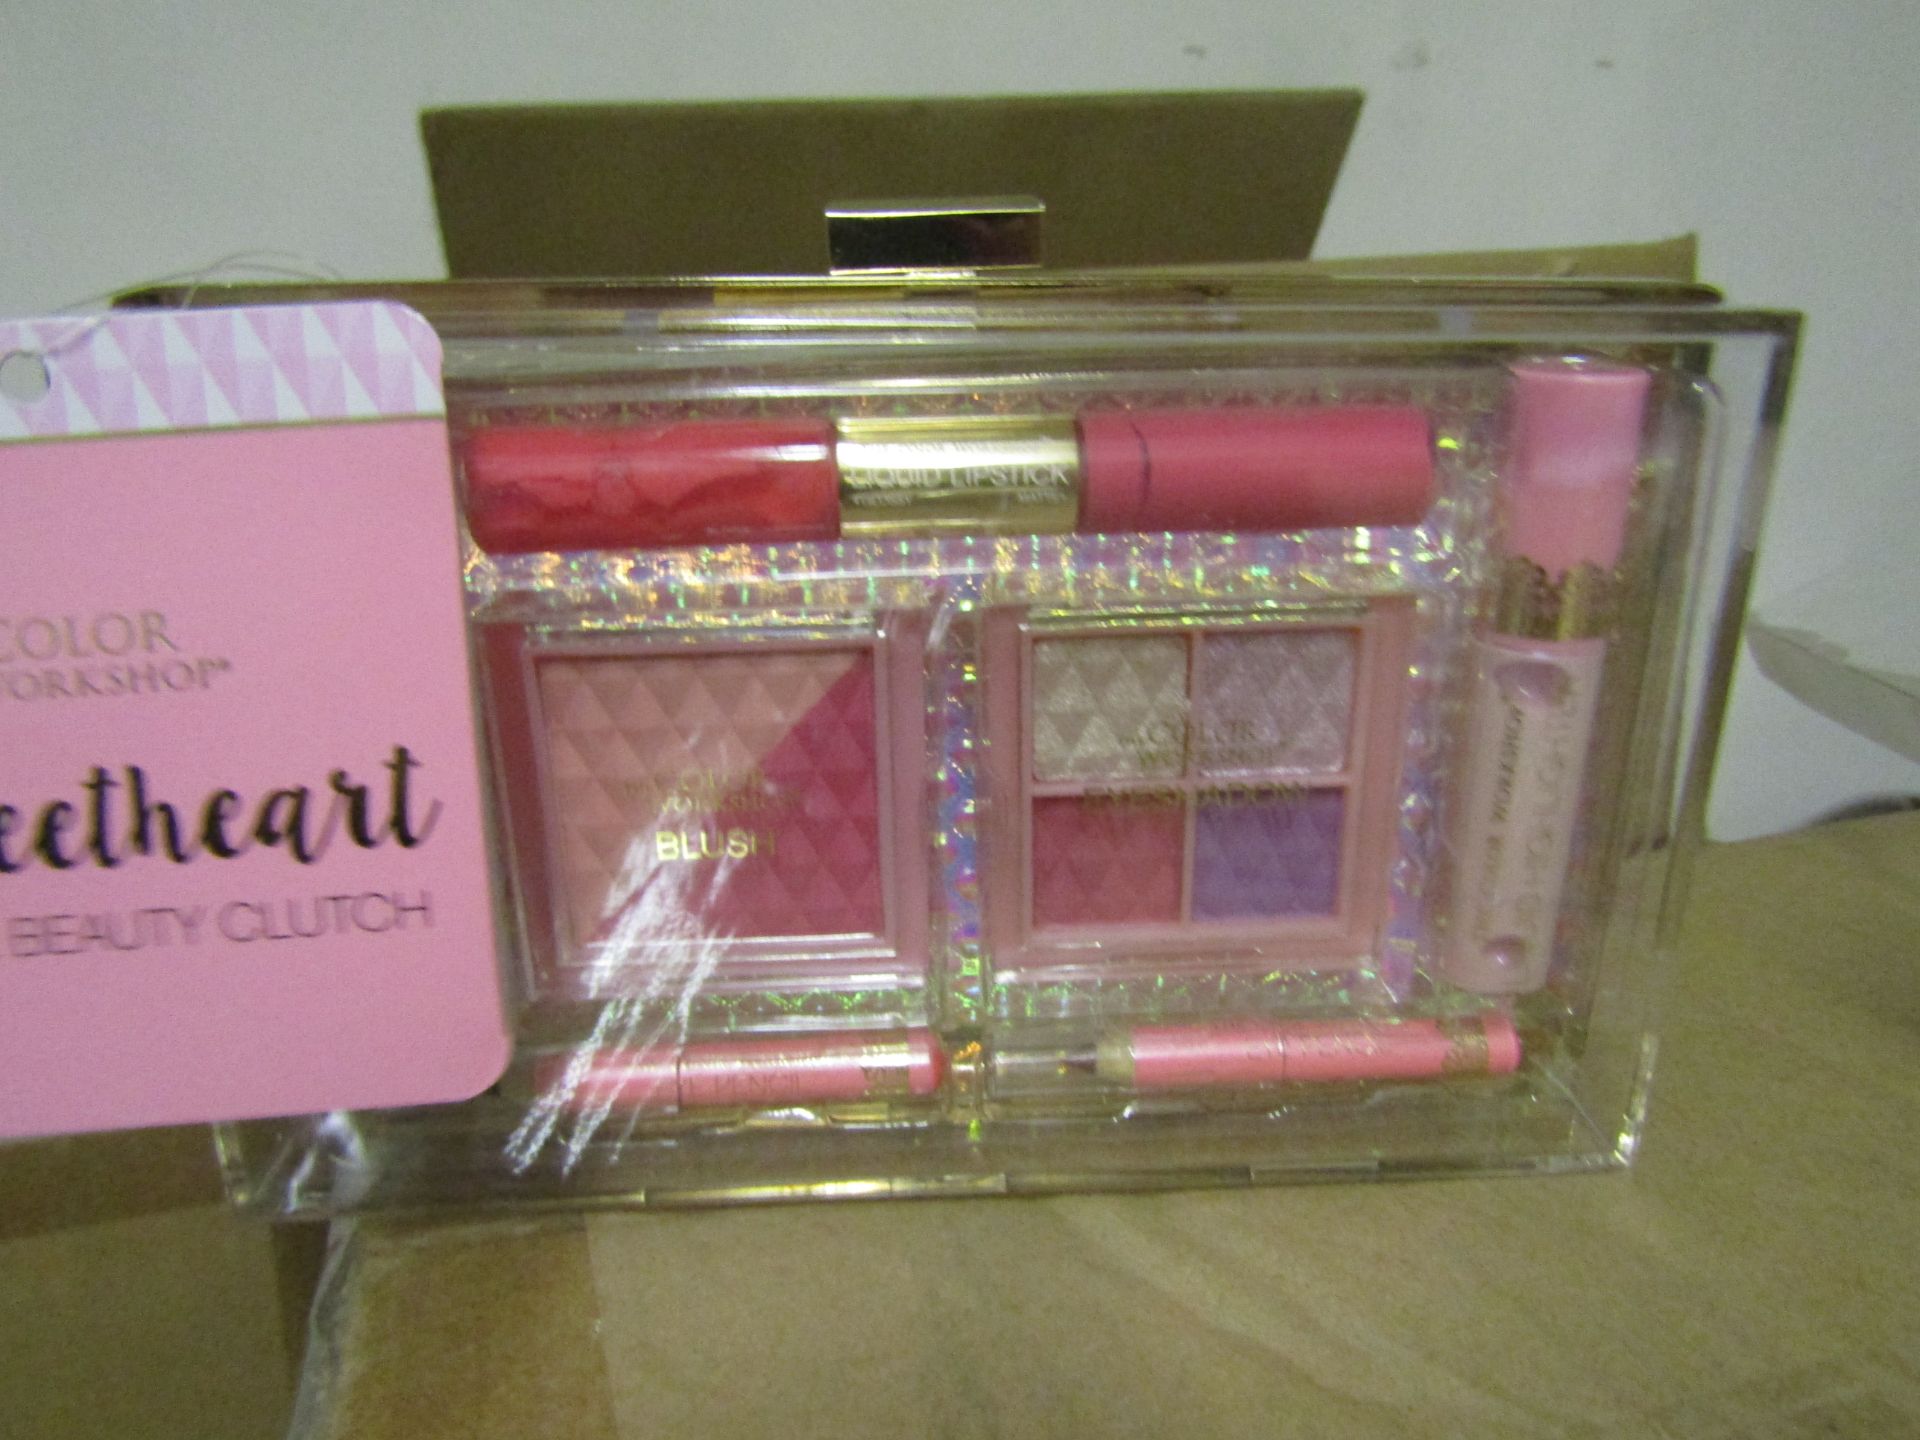 The Colour Workshop - Sweetheart 14-Piece Beauty Set With Clutch Bag - New & Packaged.